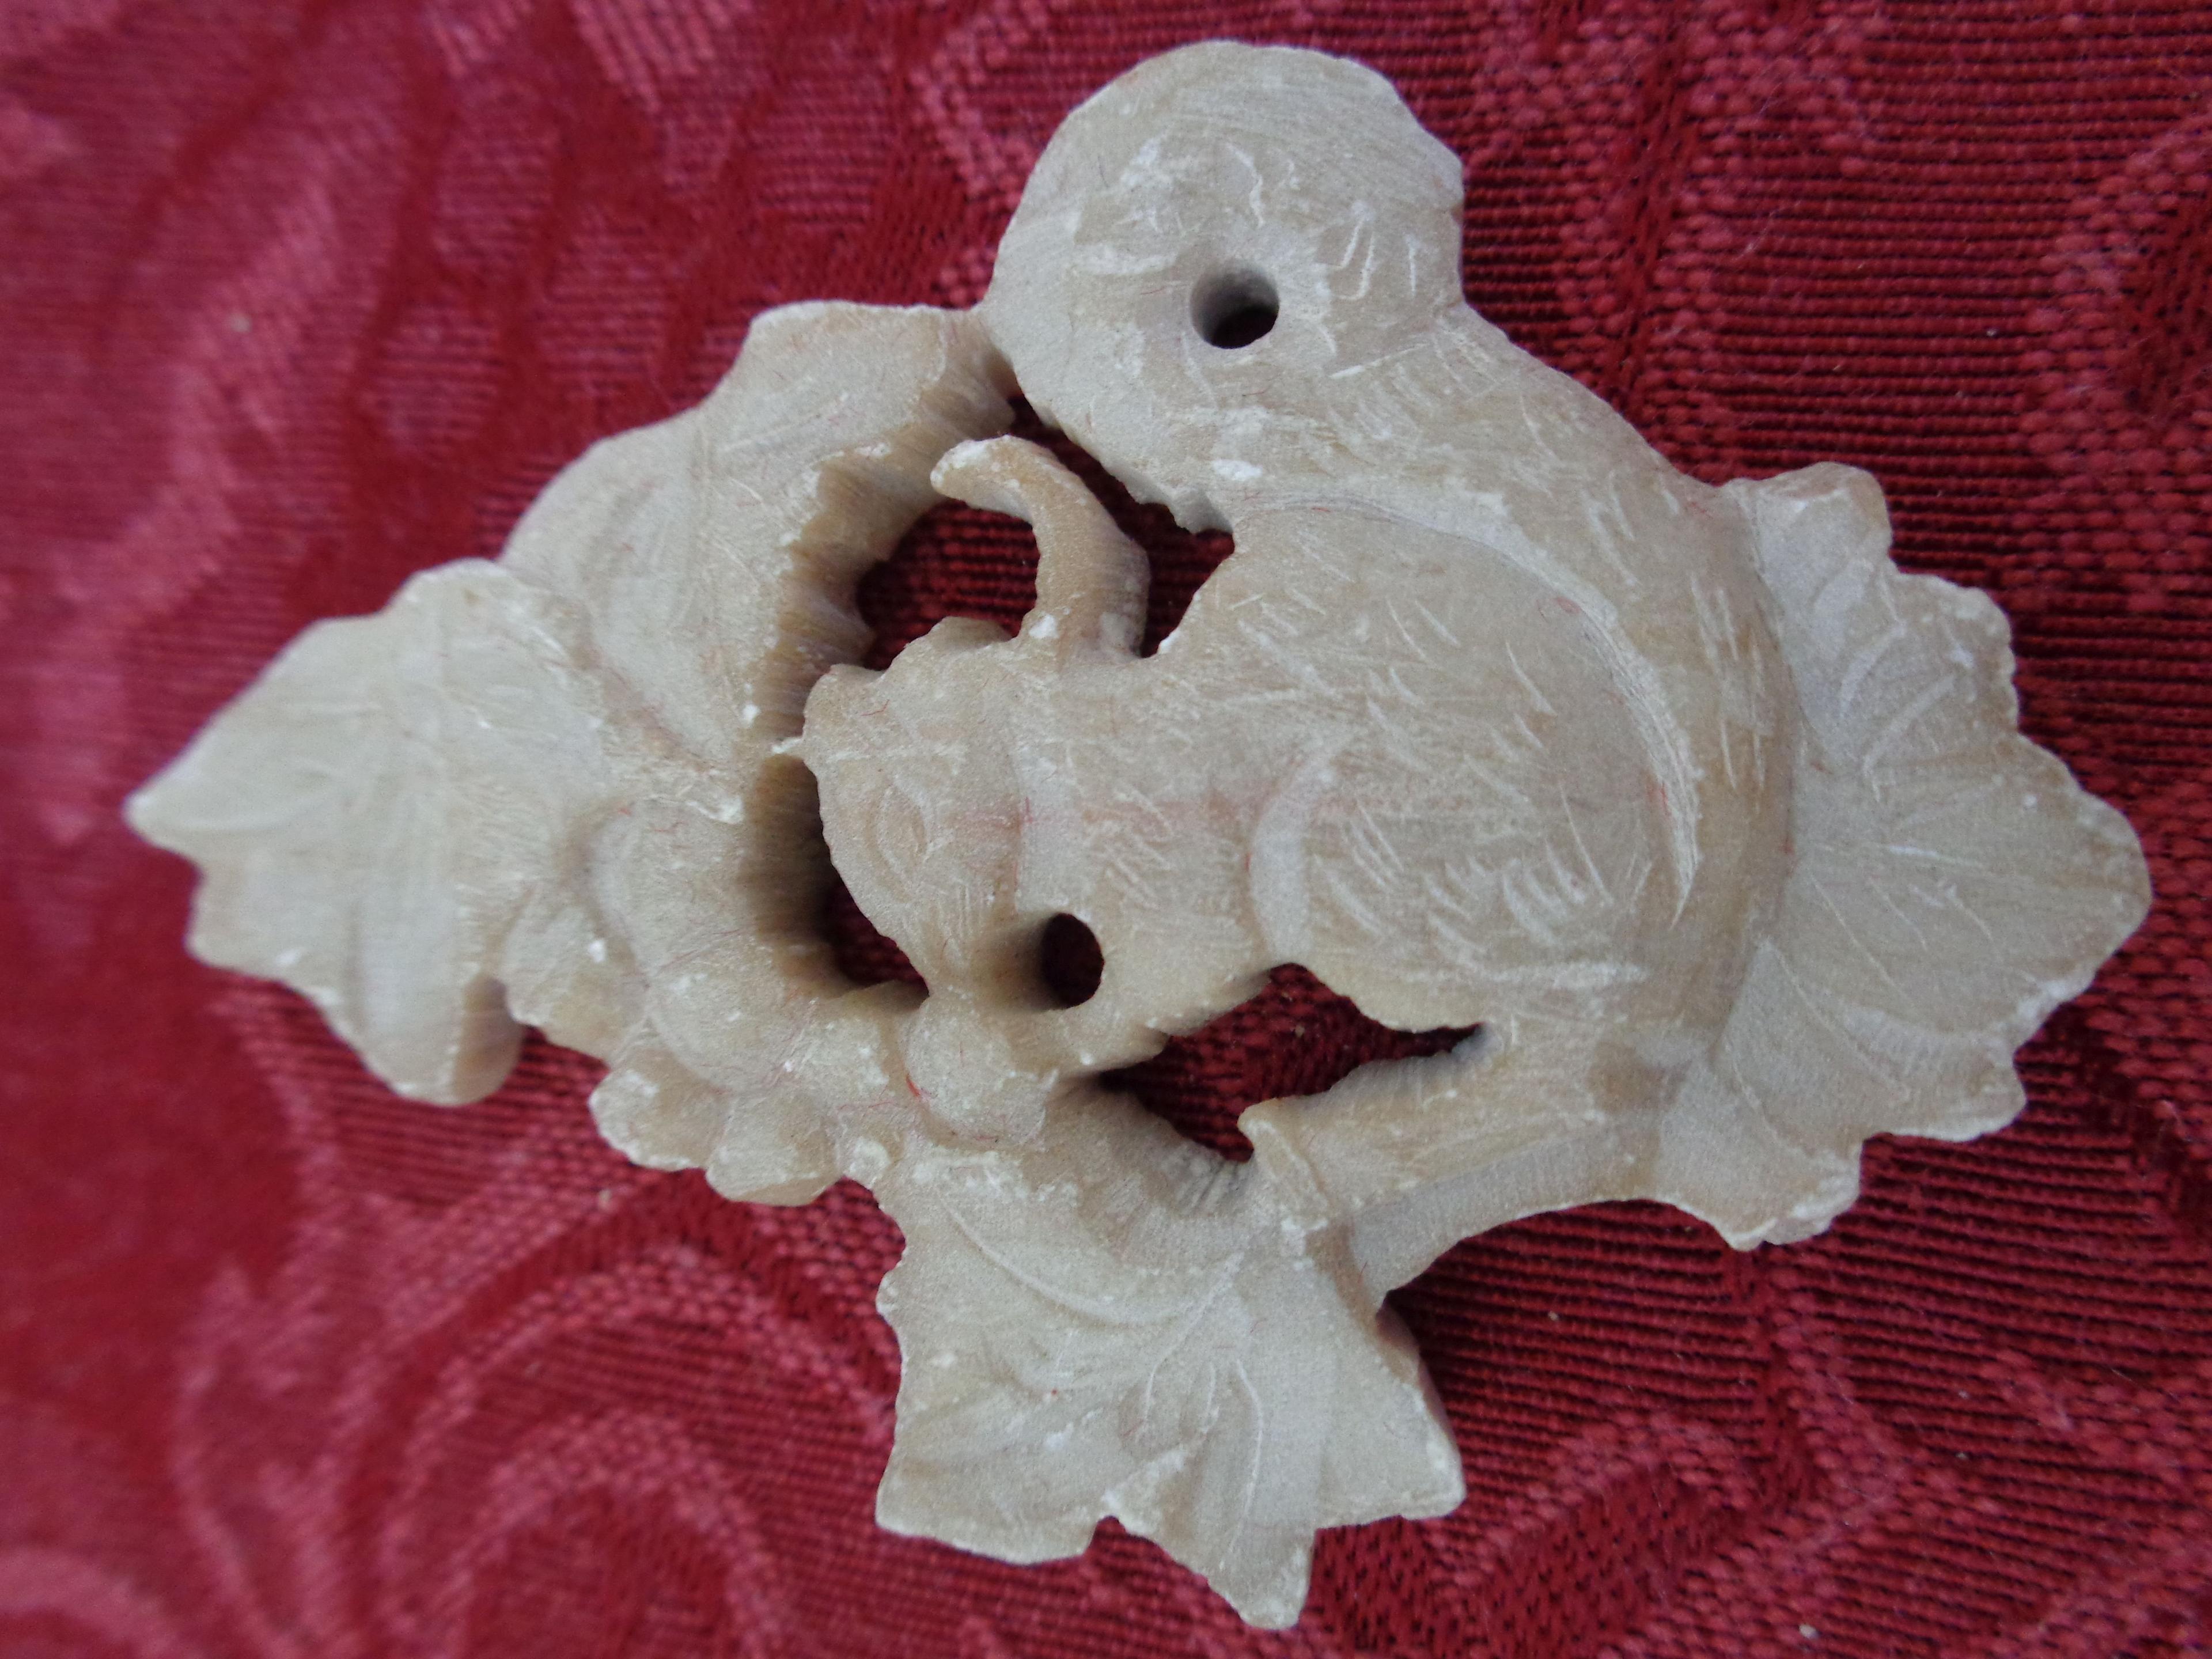 Ivory Pendant - Hand Carved Ivory Pendant - Squarel in Tree Carving